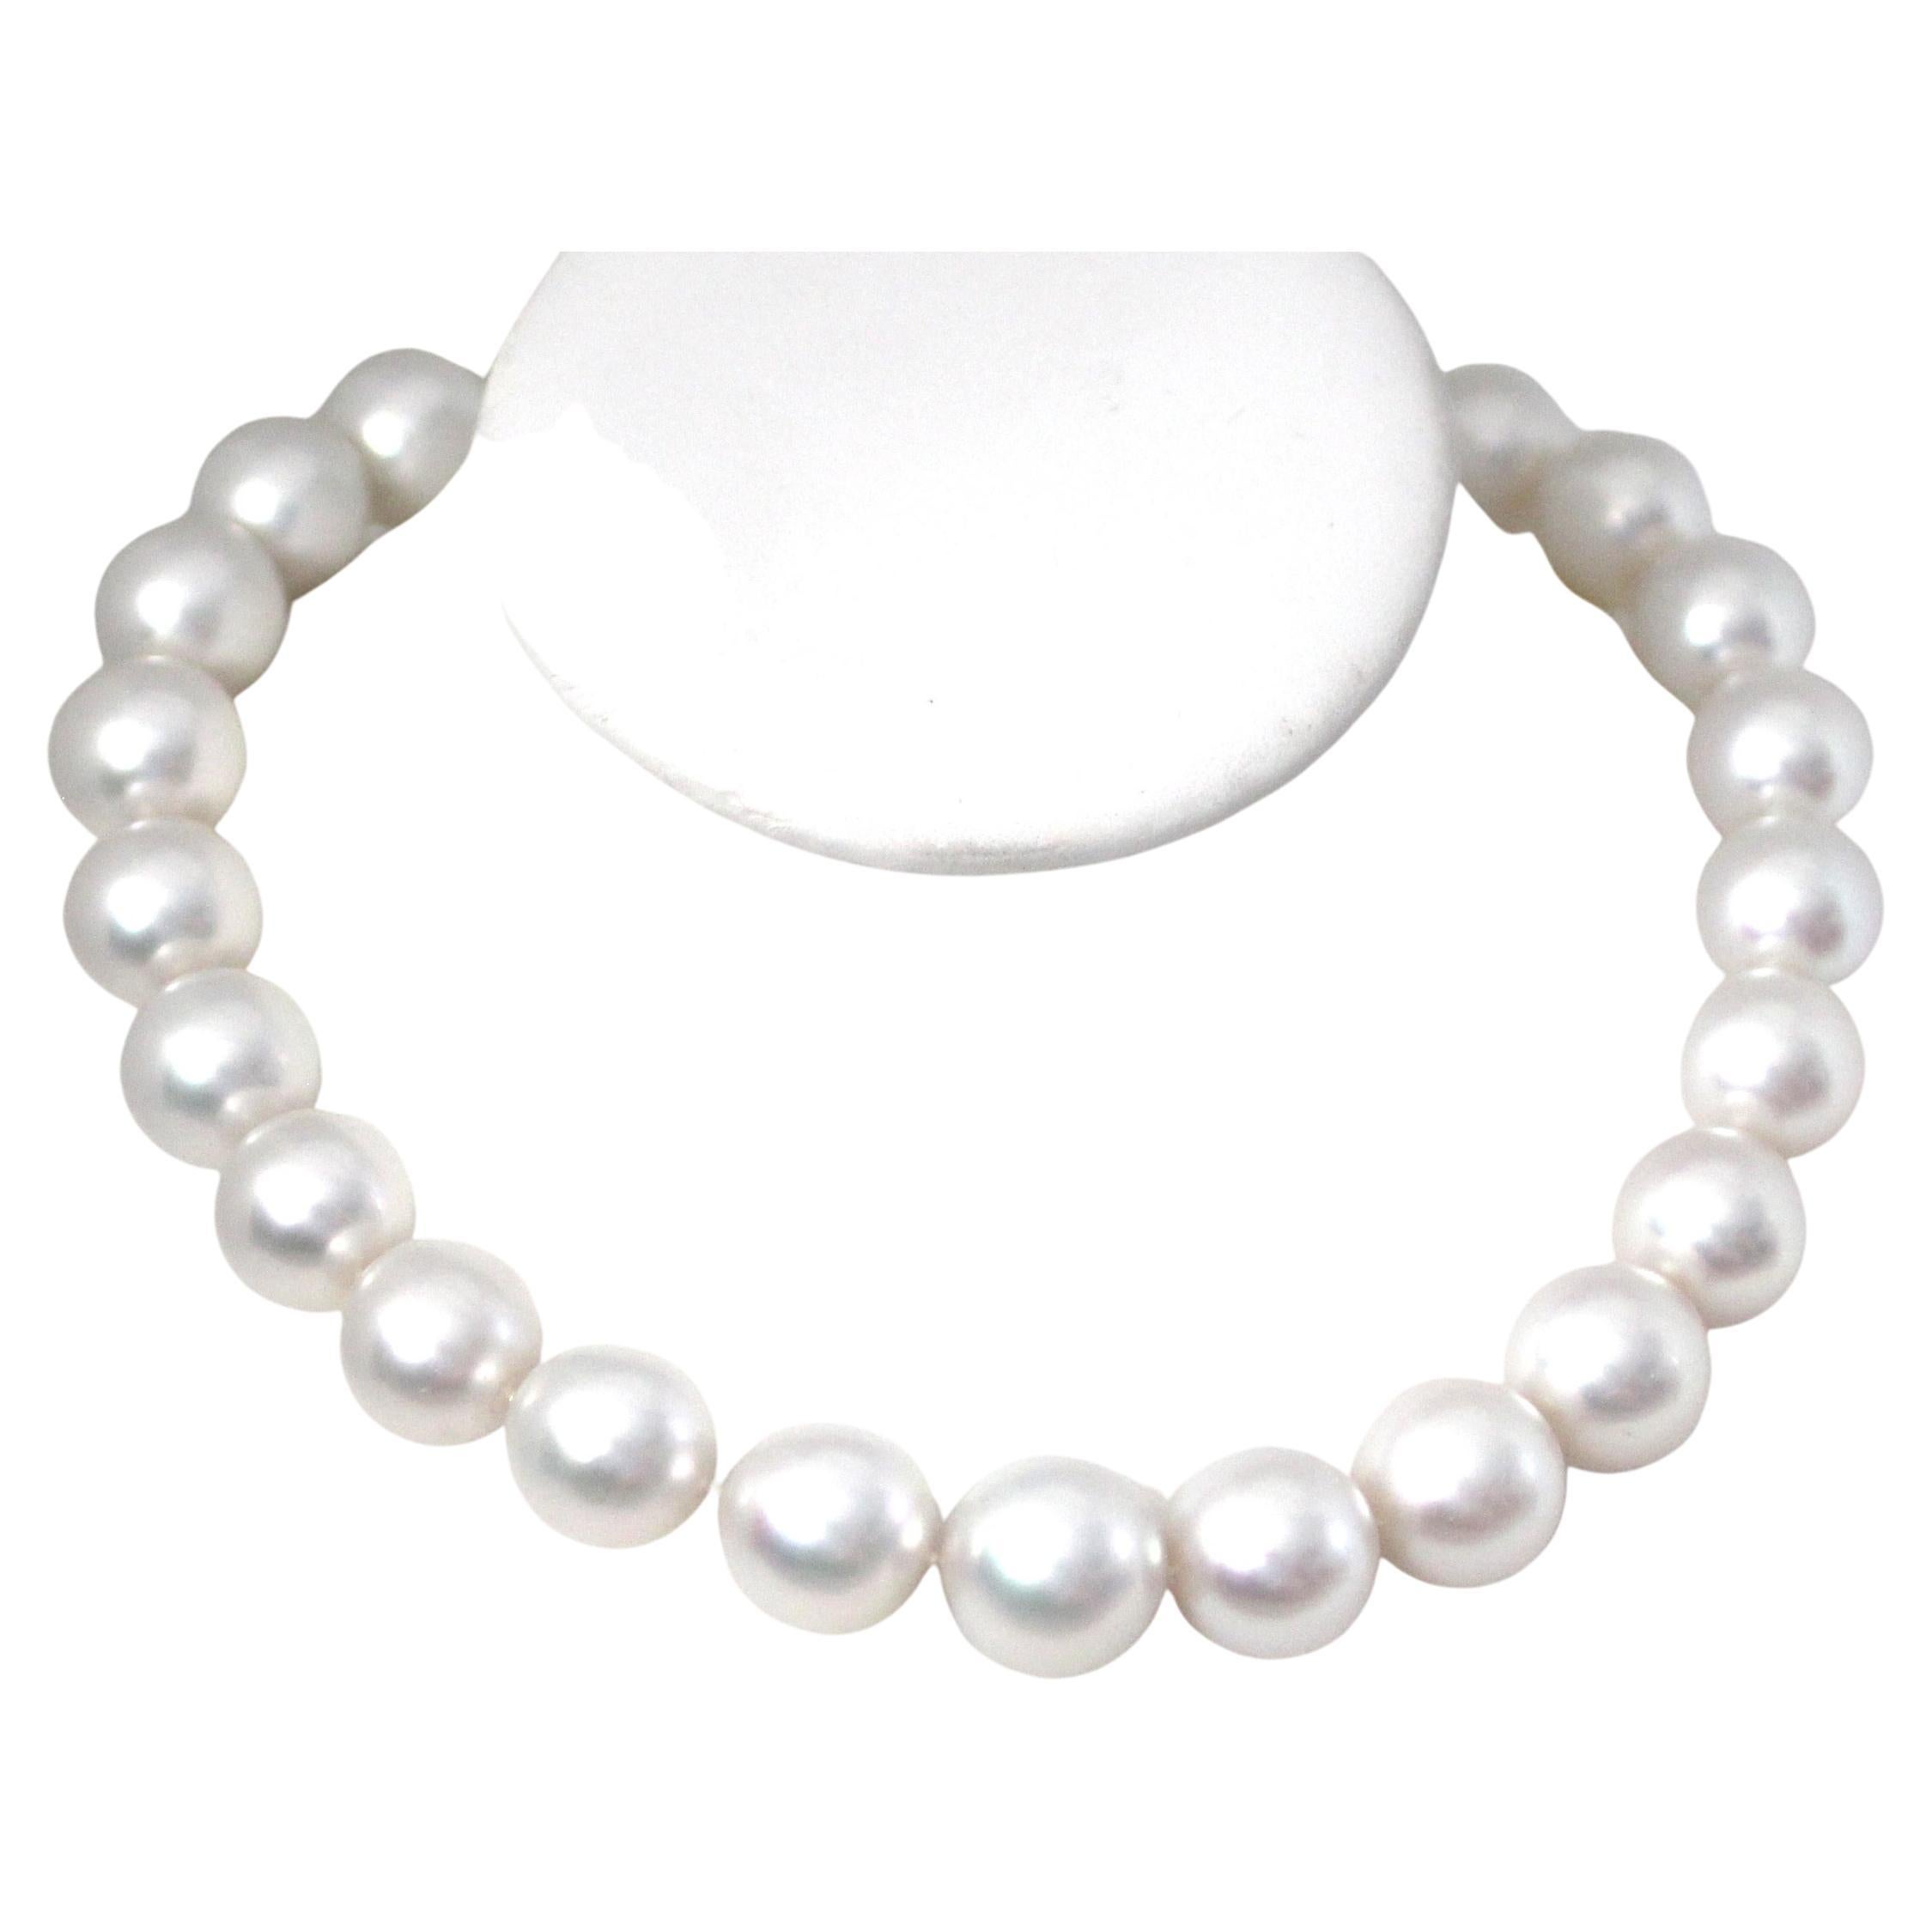 Hakimoto By Jewel Of Ocean South Sea Pearl Necklace
Est. Retail $280,000.00
13.7mm 18K white gold Gold Clasp
Featuring 1.72 Carat Round Brilliant Diamond
17.6x15mm mm Australian Cultured South Sea Pearls Necklace
Metal Finish: High Polish
Total Item